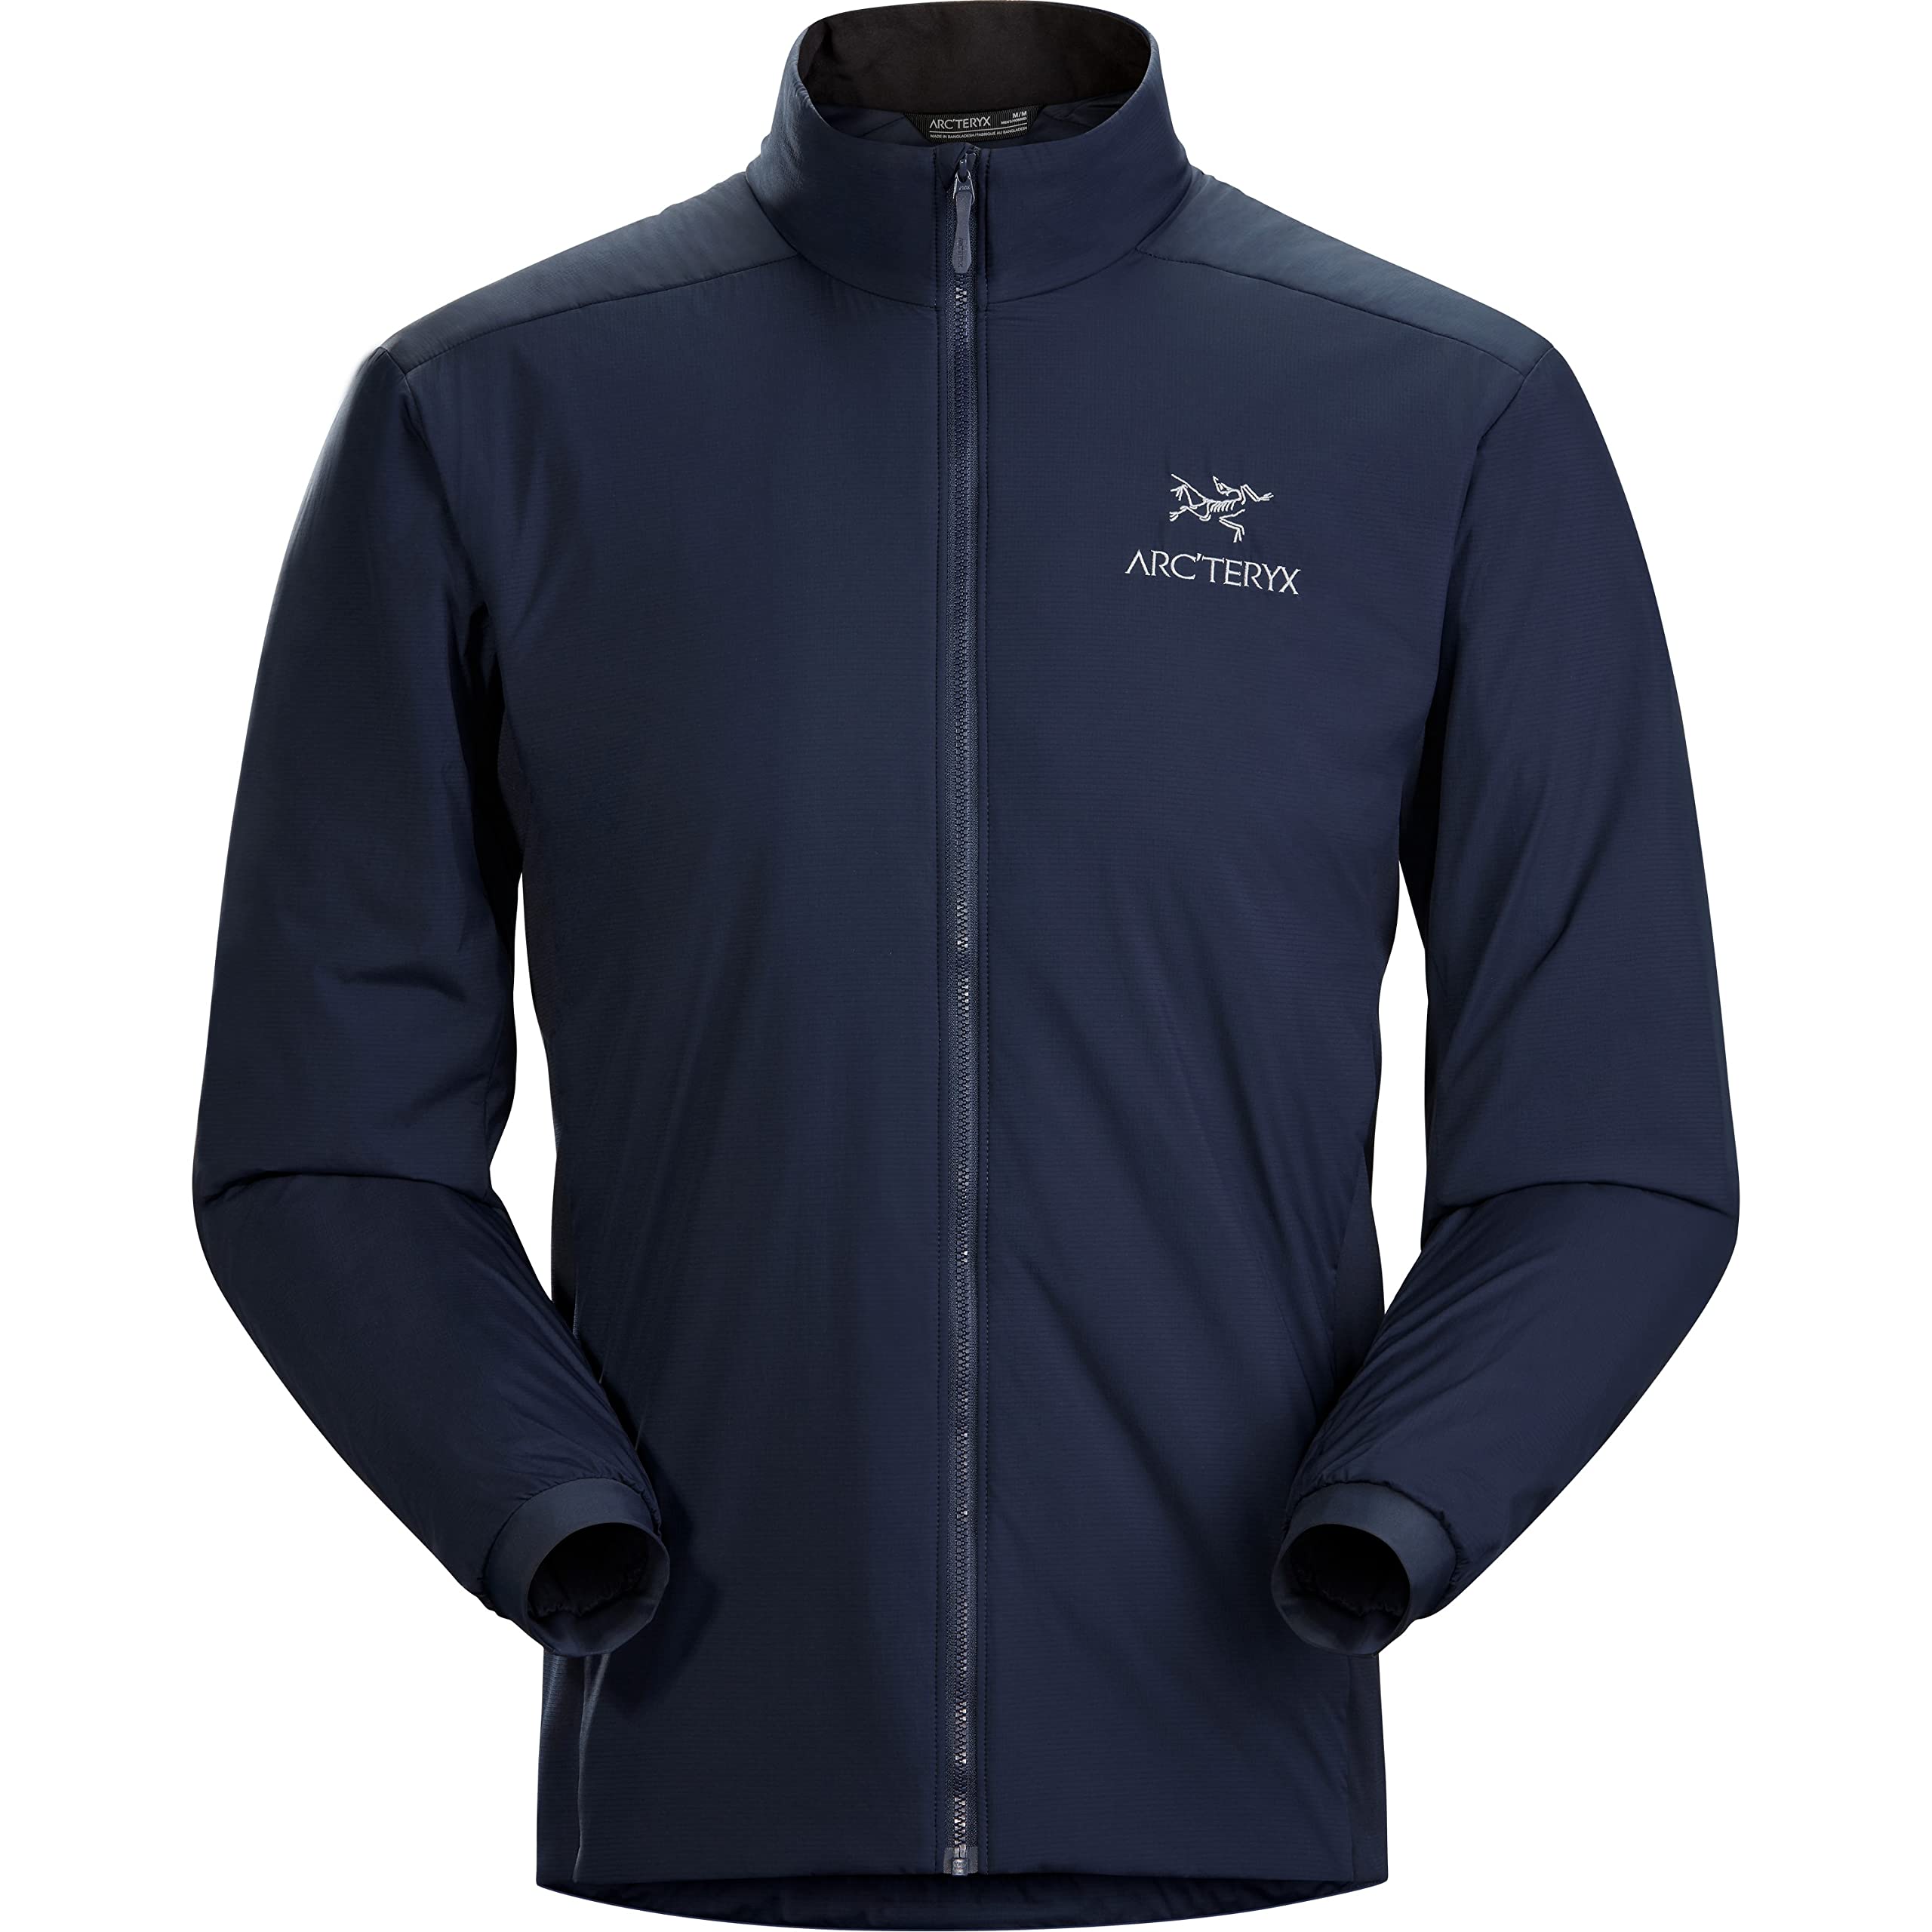 Arc'teryx Atom LT Jacket Men's | Lightweight Versatile Synthetically Insulated Jacket, List Price is $240, Now Only $204